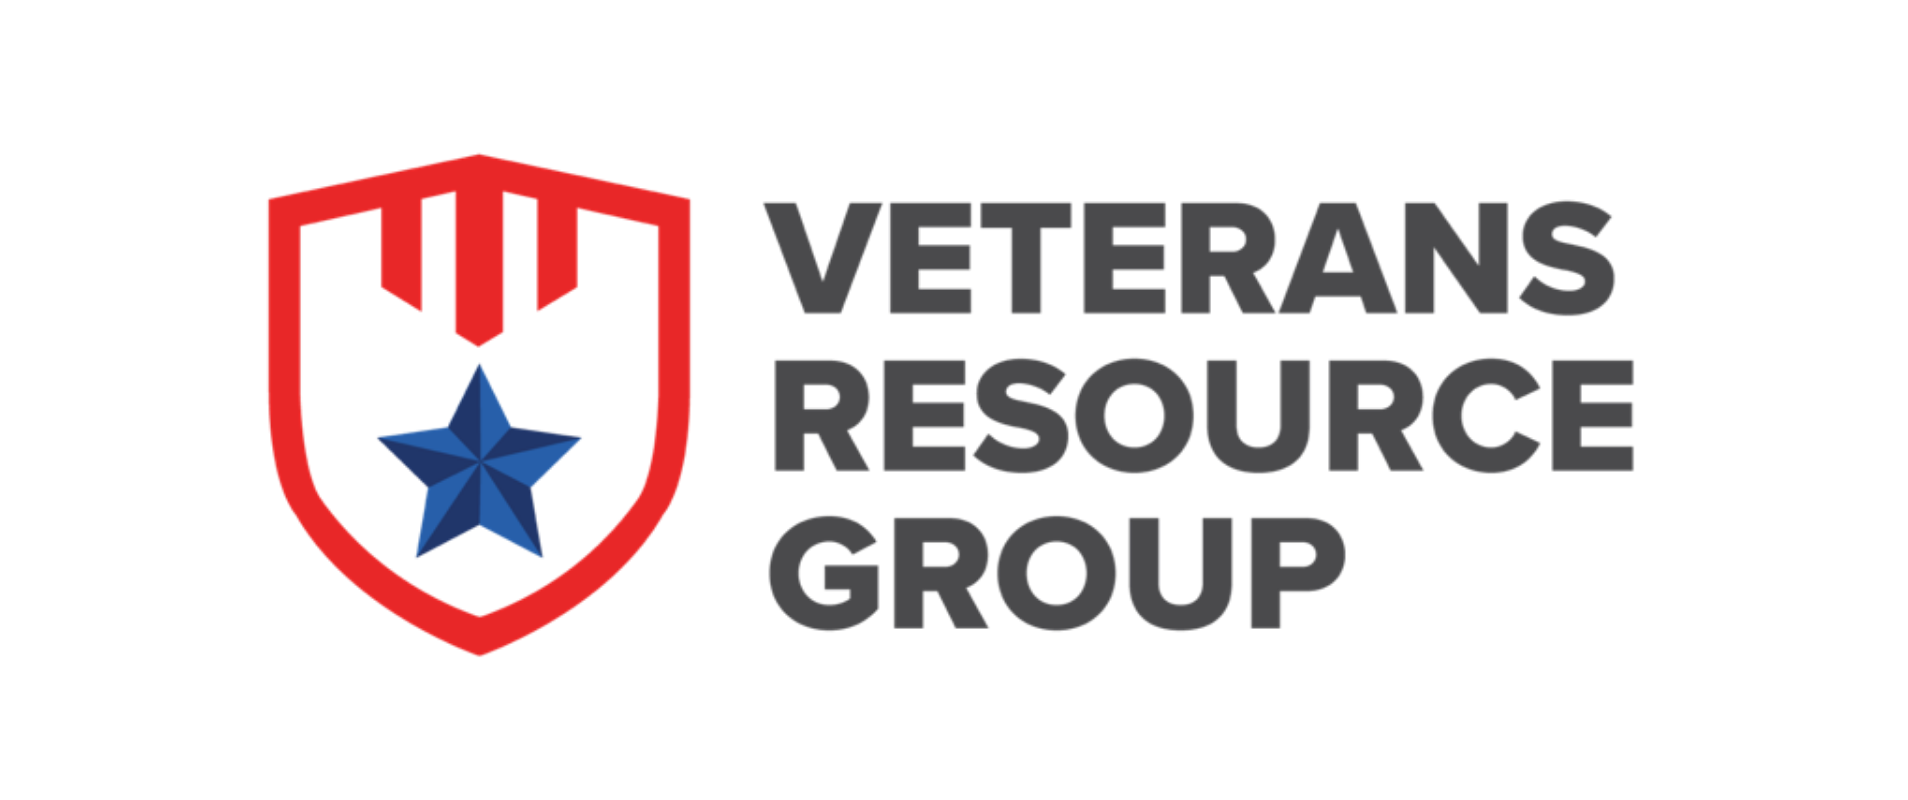 DISH Veterans Resource group company that supports veterans